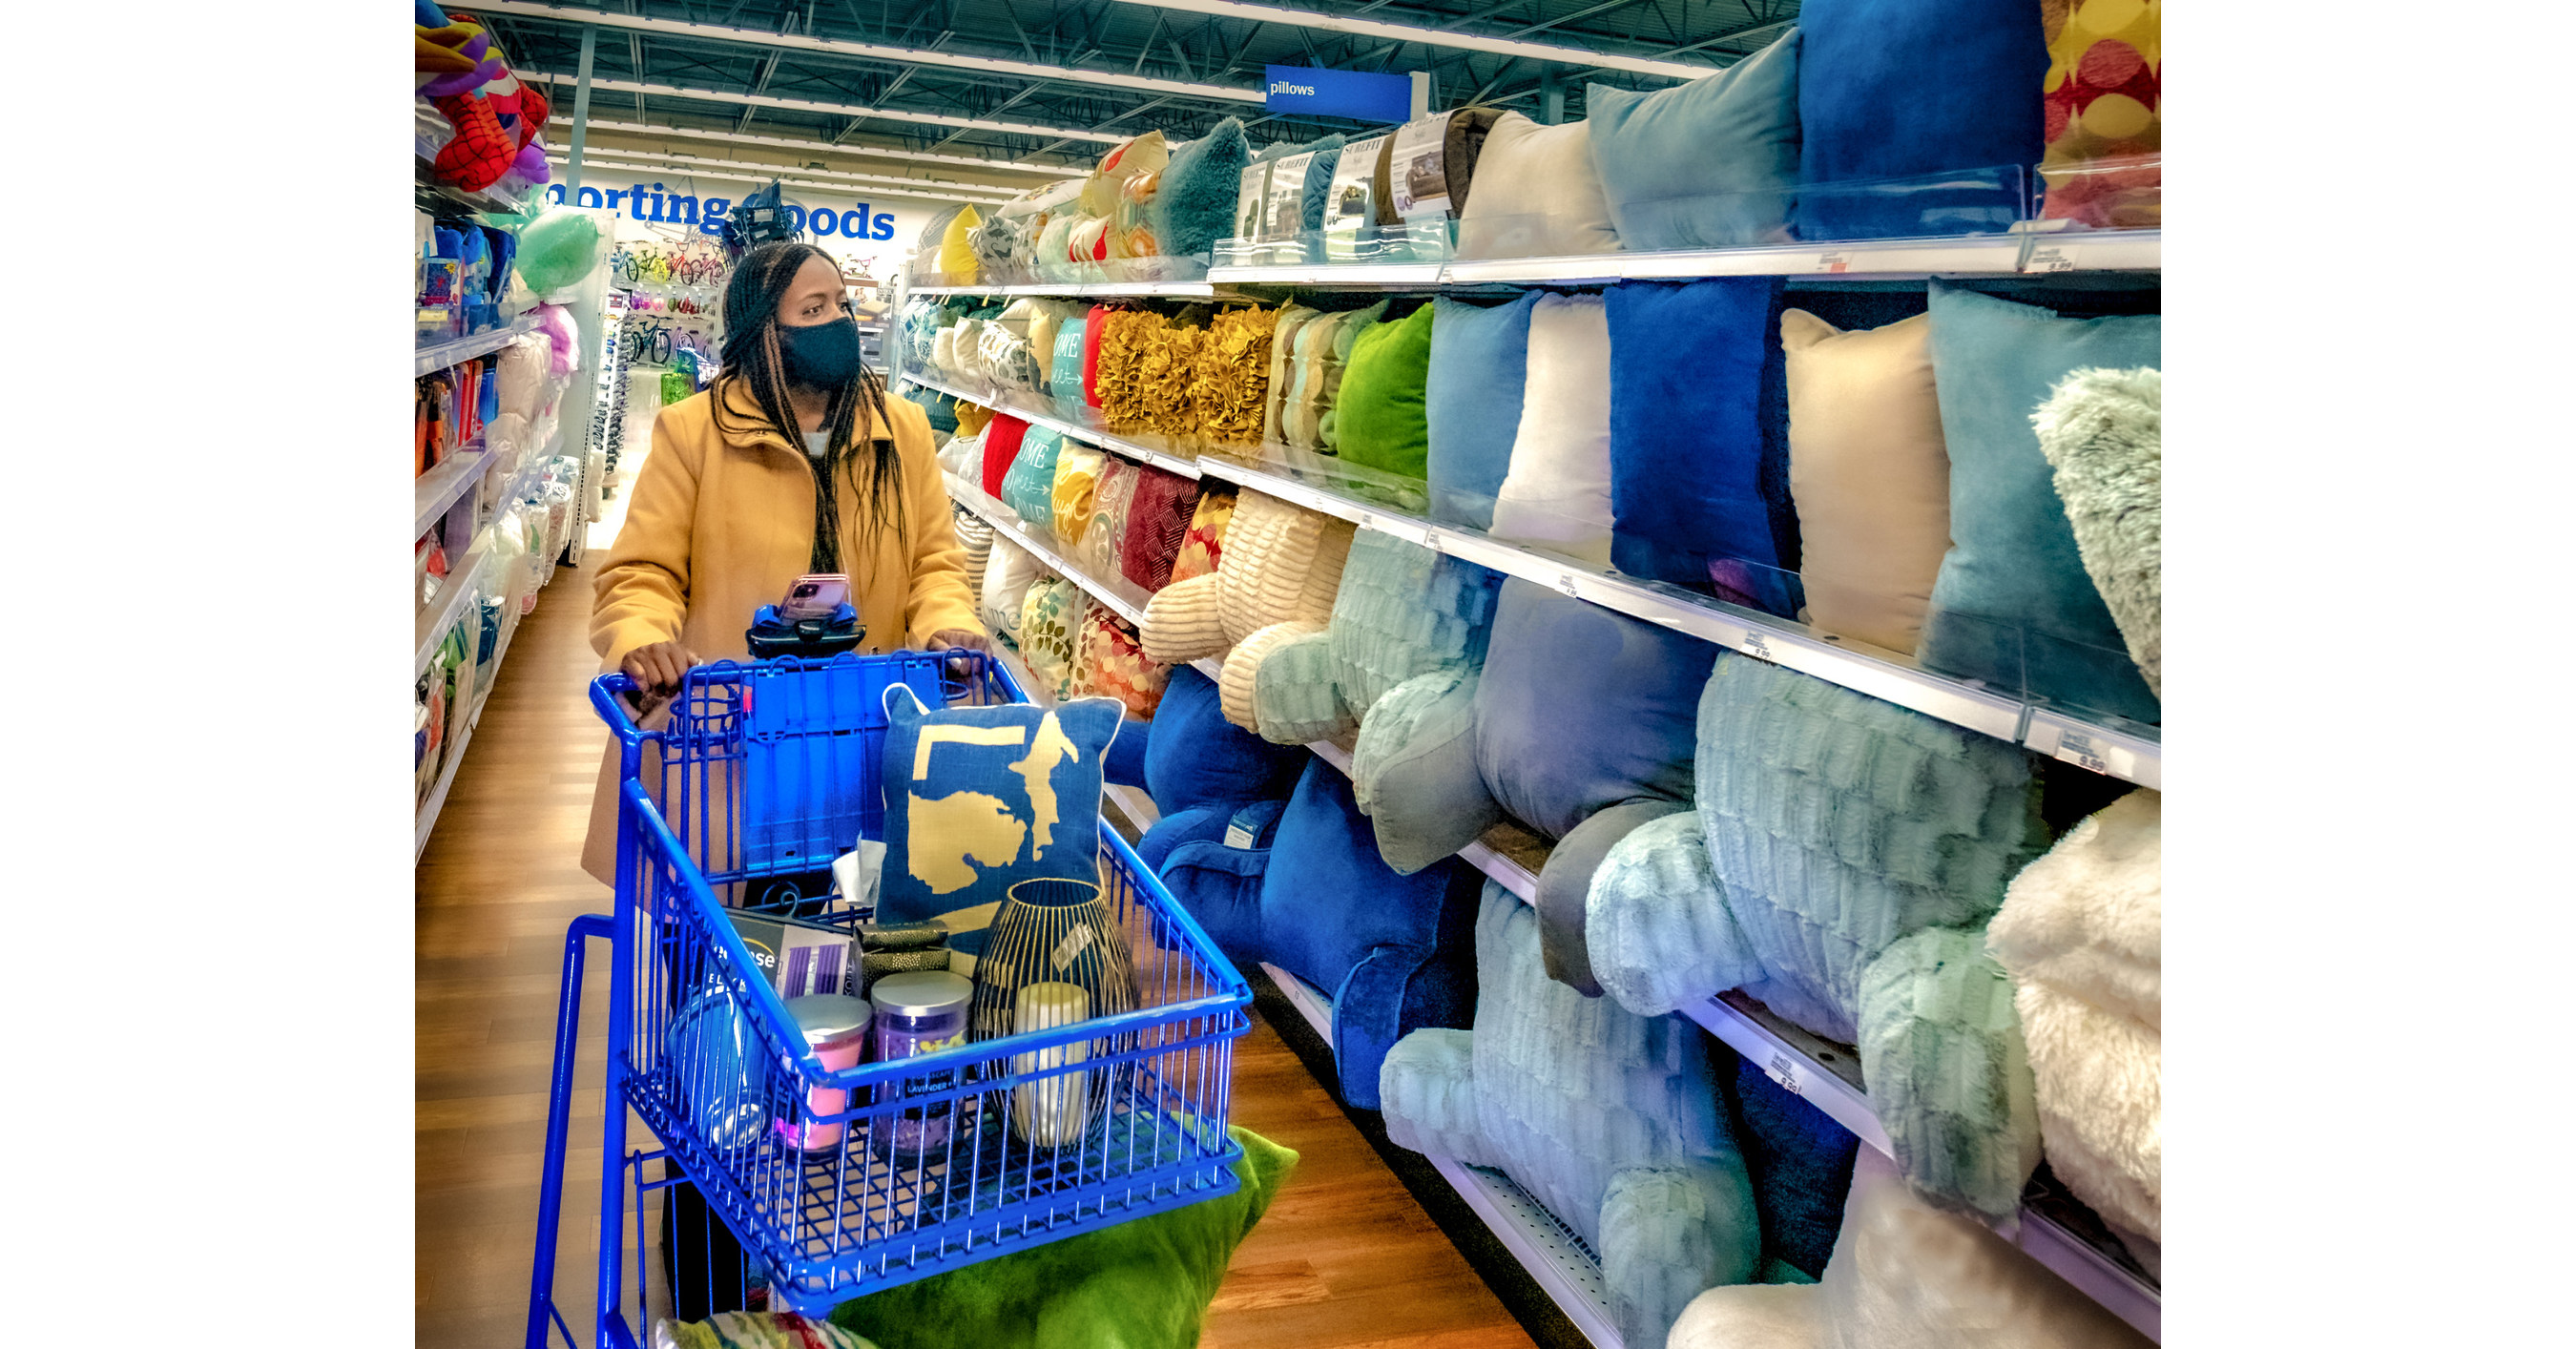 Meijer Reveals Unique Shopping Trends One Year into Pandemic Living